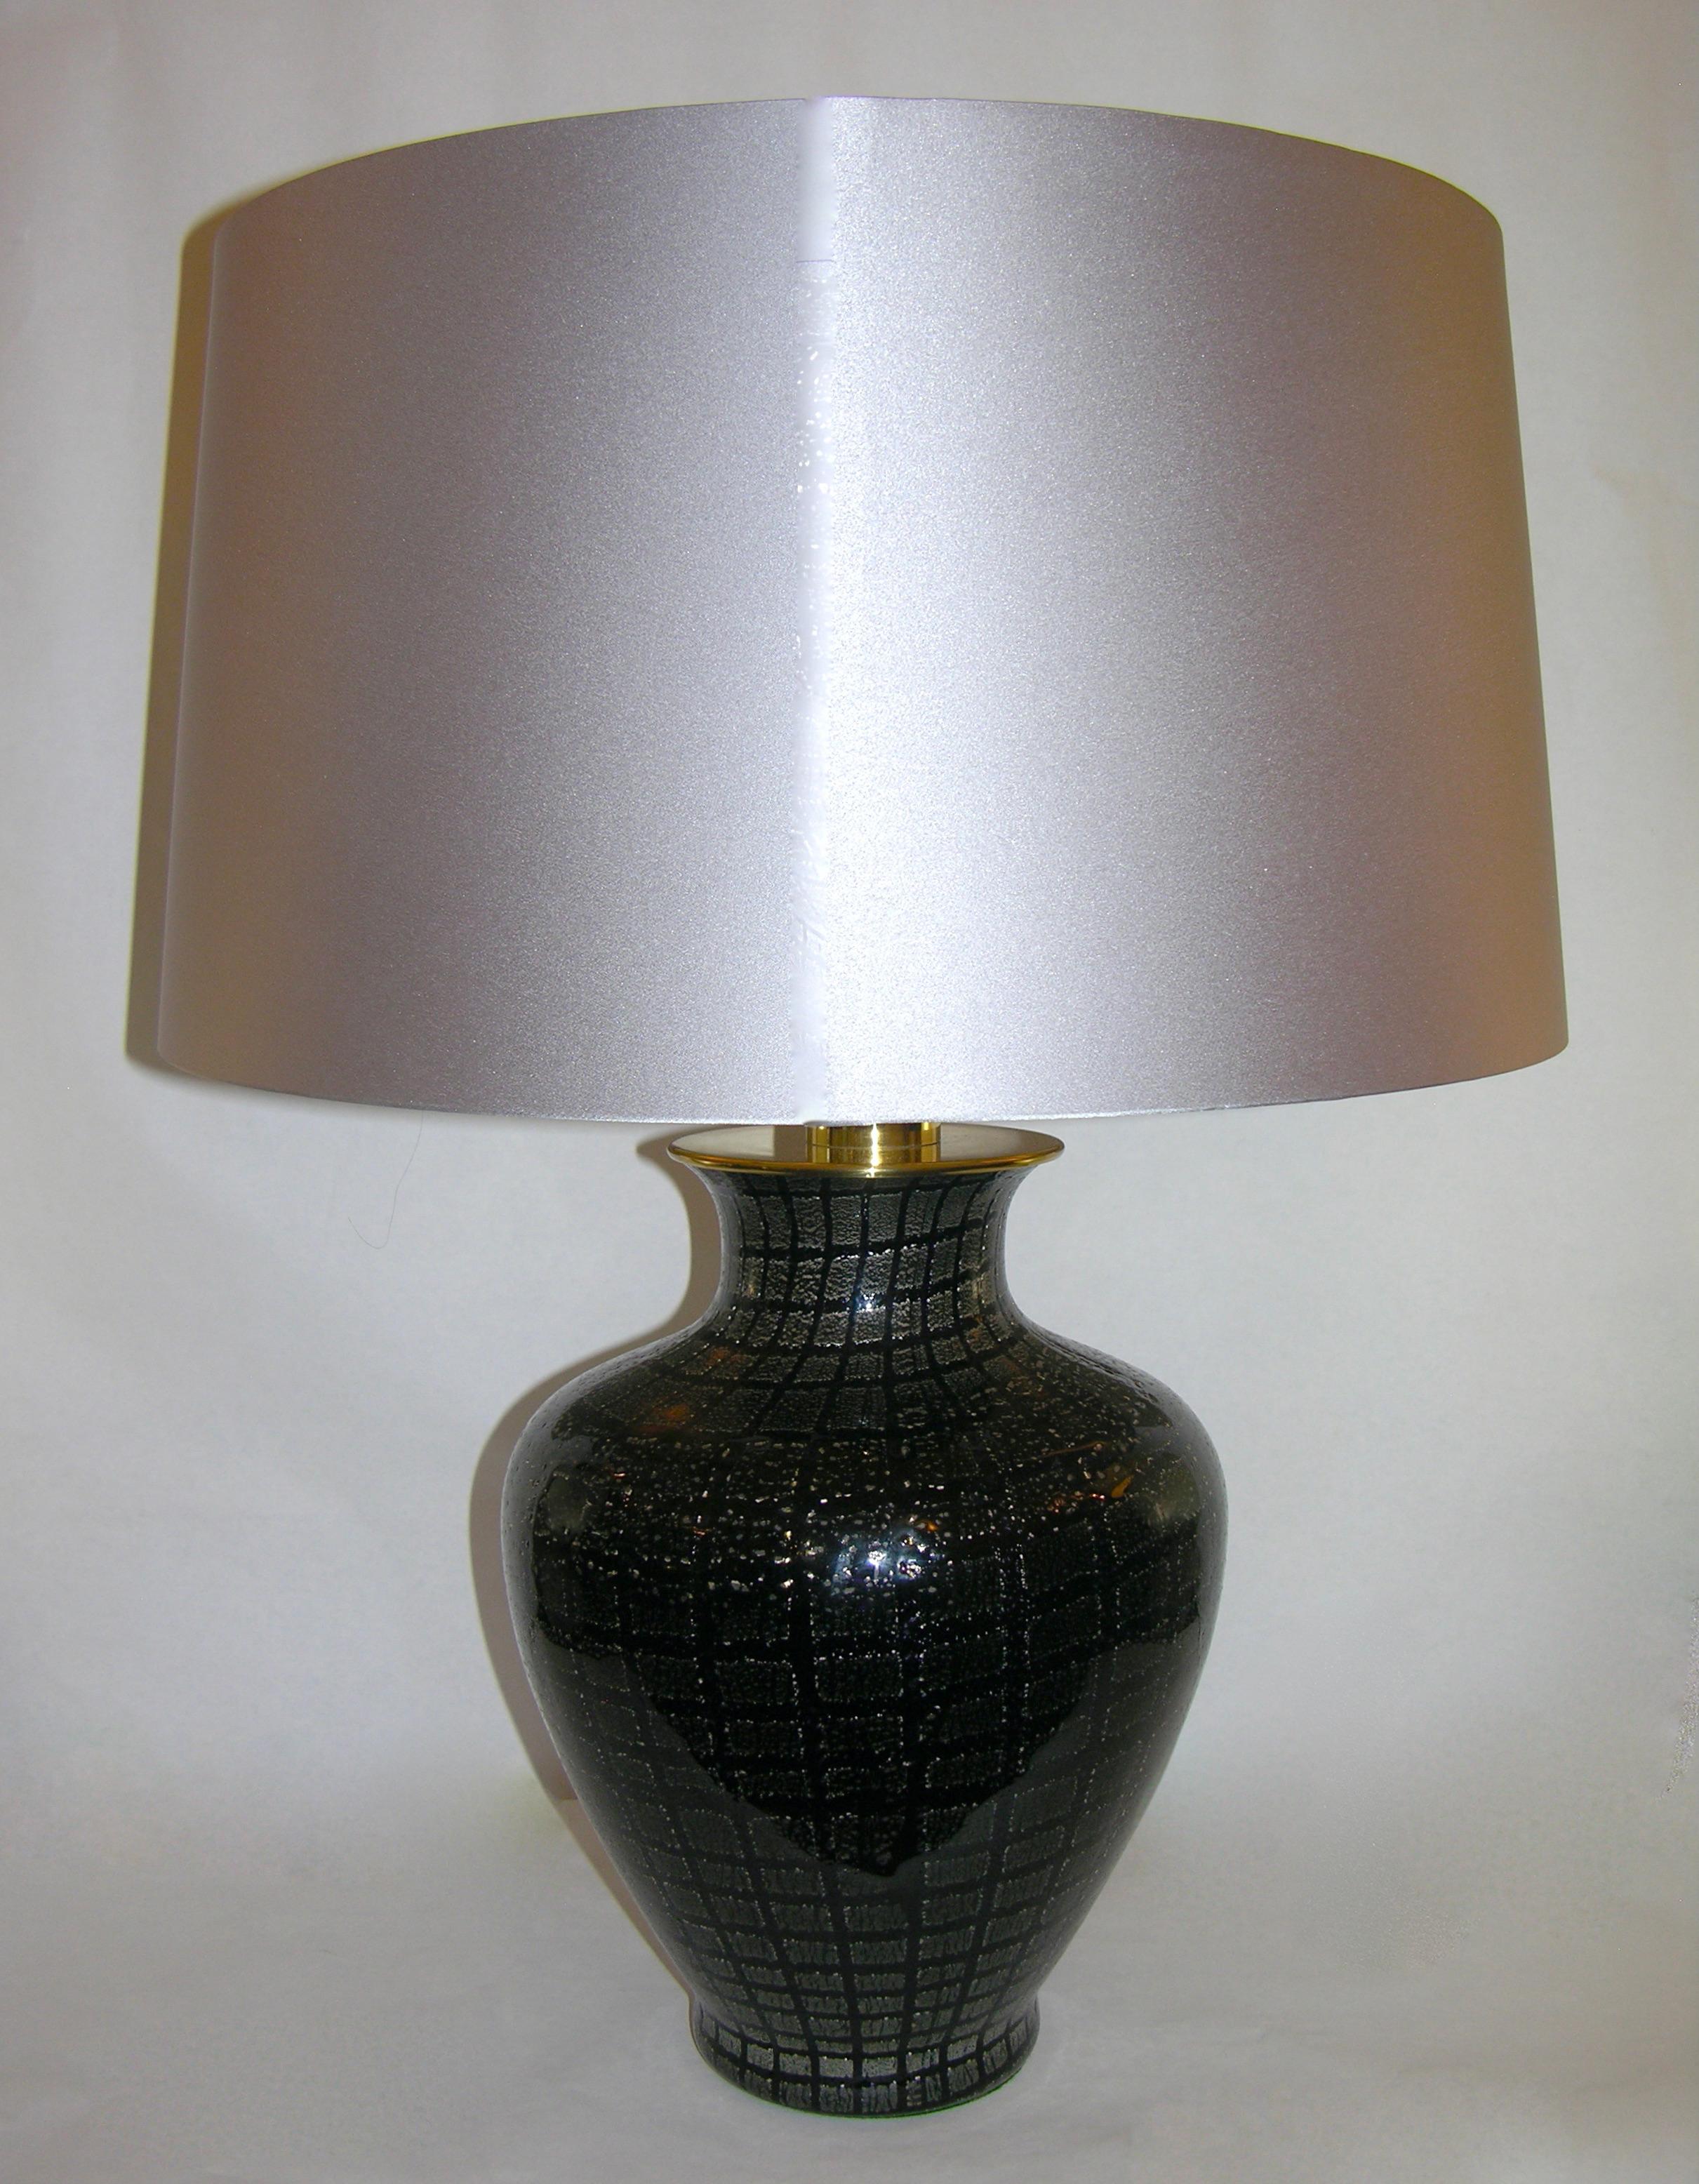 VeArt 1960s Italian Pair of Copper Silver Speckles Black Murano Glass Urn Lamps For Sale 5